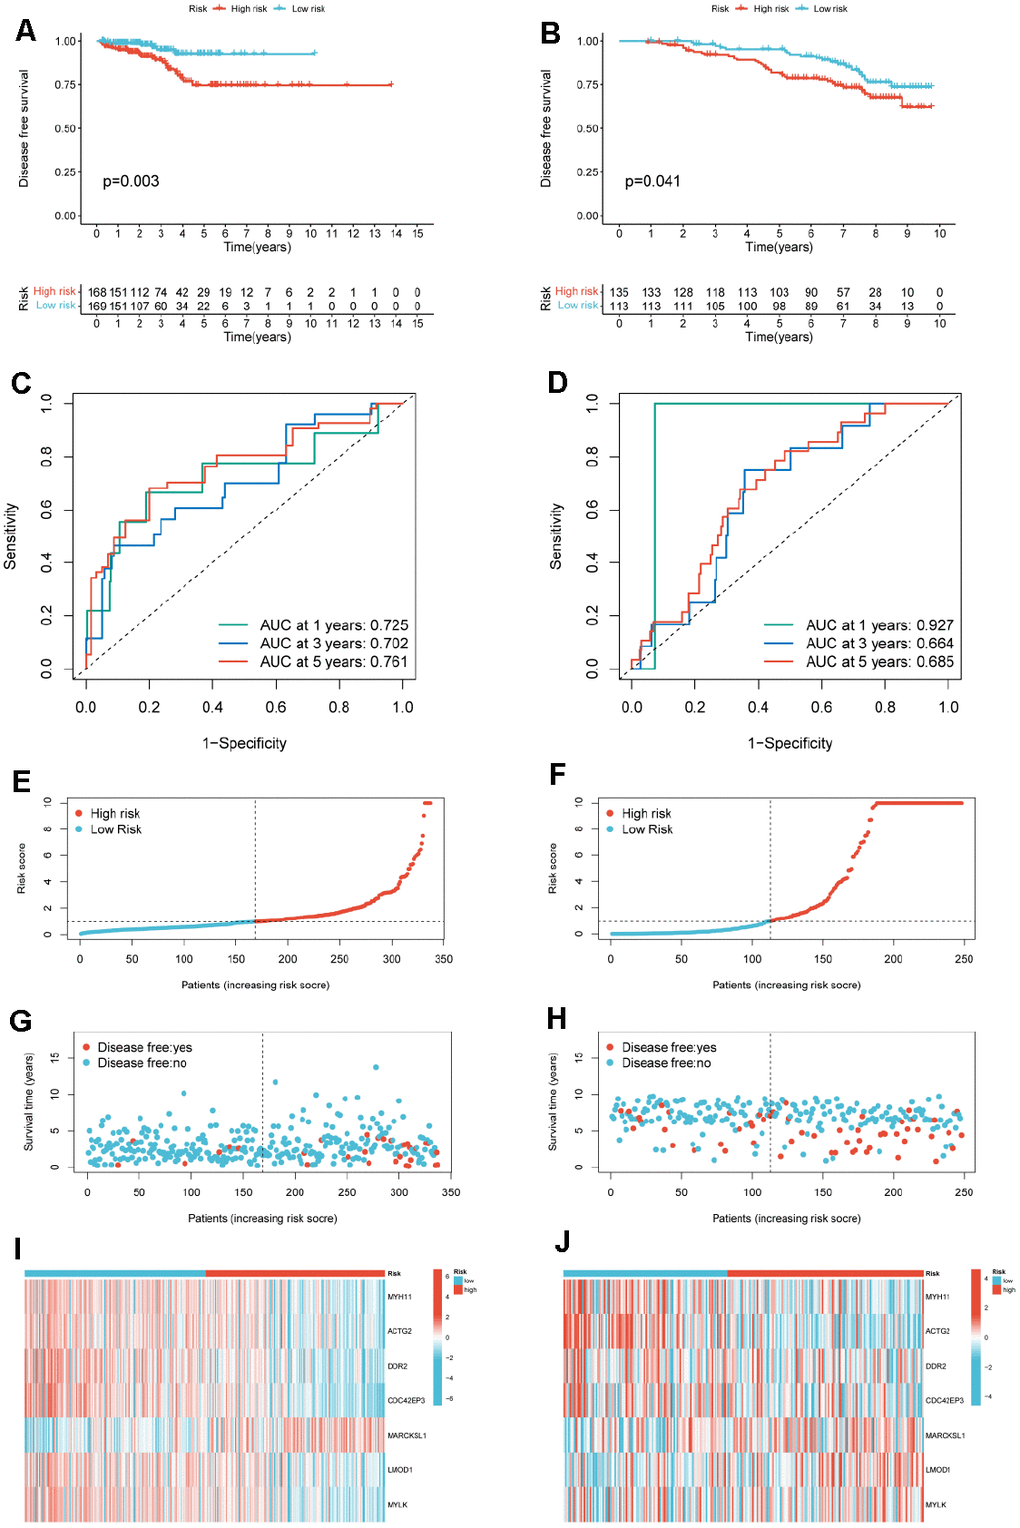 Construction of a risk model for PCa patients. (A) KM curves for PCa cancer patients in the high-/low-risk group in TCGA-PRAD. (B) KM curves for PCa cancer patients in the high-/low-risk group in GSE116918. (C) ROC curves of the risk model of 1-, 3-, and 5-years for DFS for the TCGA-PRAD. (D) ROC curves of the risk model of 1-, 3-, and 5-years for DFS for the GSE116918. Distribution of the risk score for TCGA-PRAD (E) and GSE116918 (F). Scatter plot of disease free status and risk score for TCGA-PRAD (G) and GSE116918 (H). Heatmap of the expression profile of the 7-mRNAs in TCGA-PRAD (I) and GSE116918 (J).